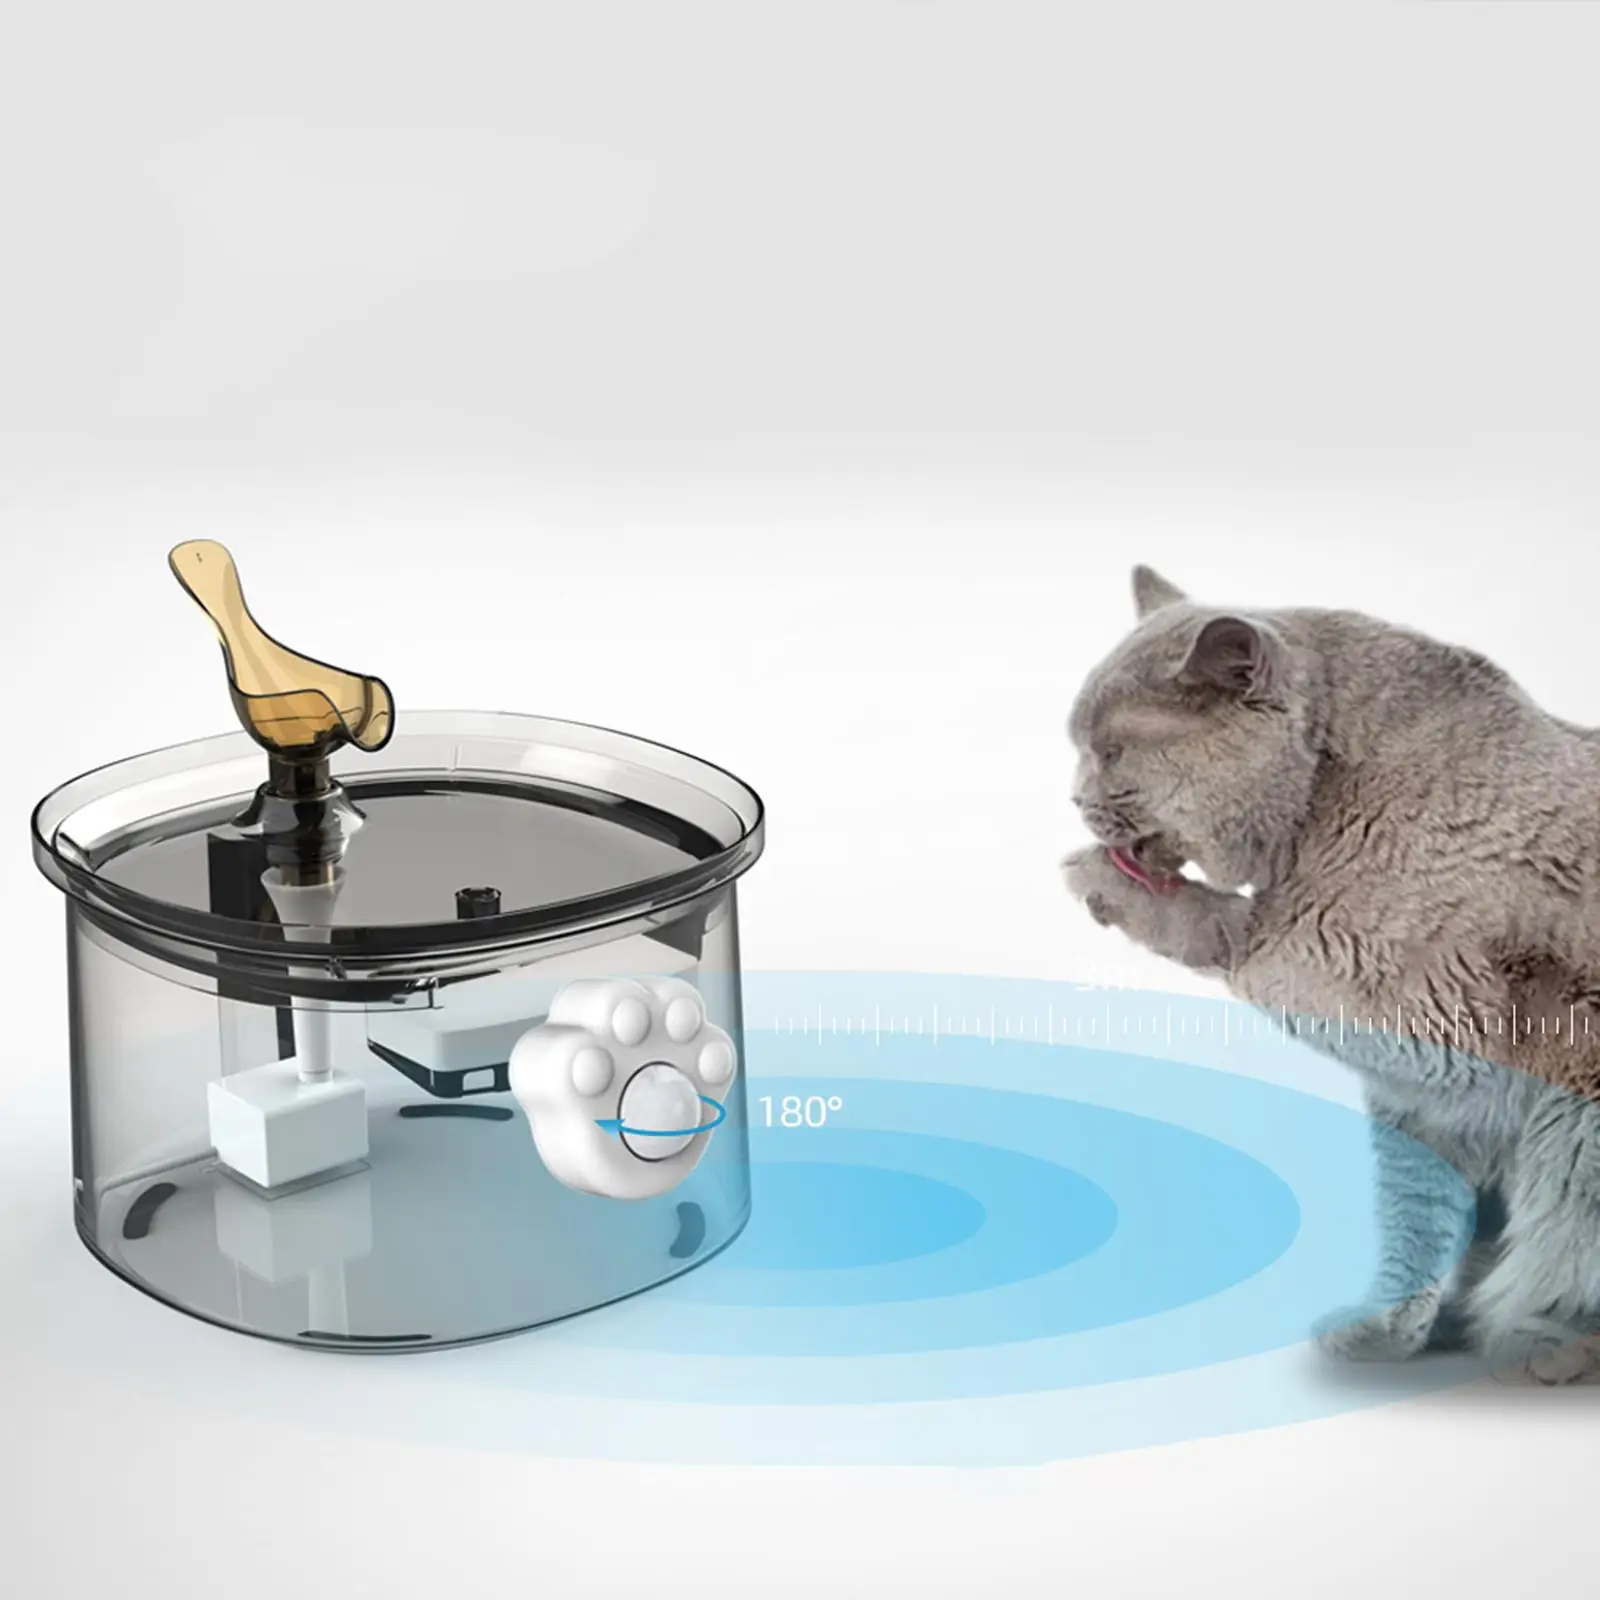 Electric Smart Motion Sensor for Automatic Cat Water Fountain Universal